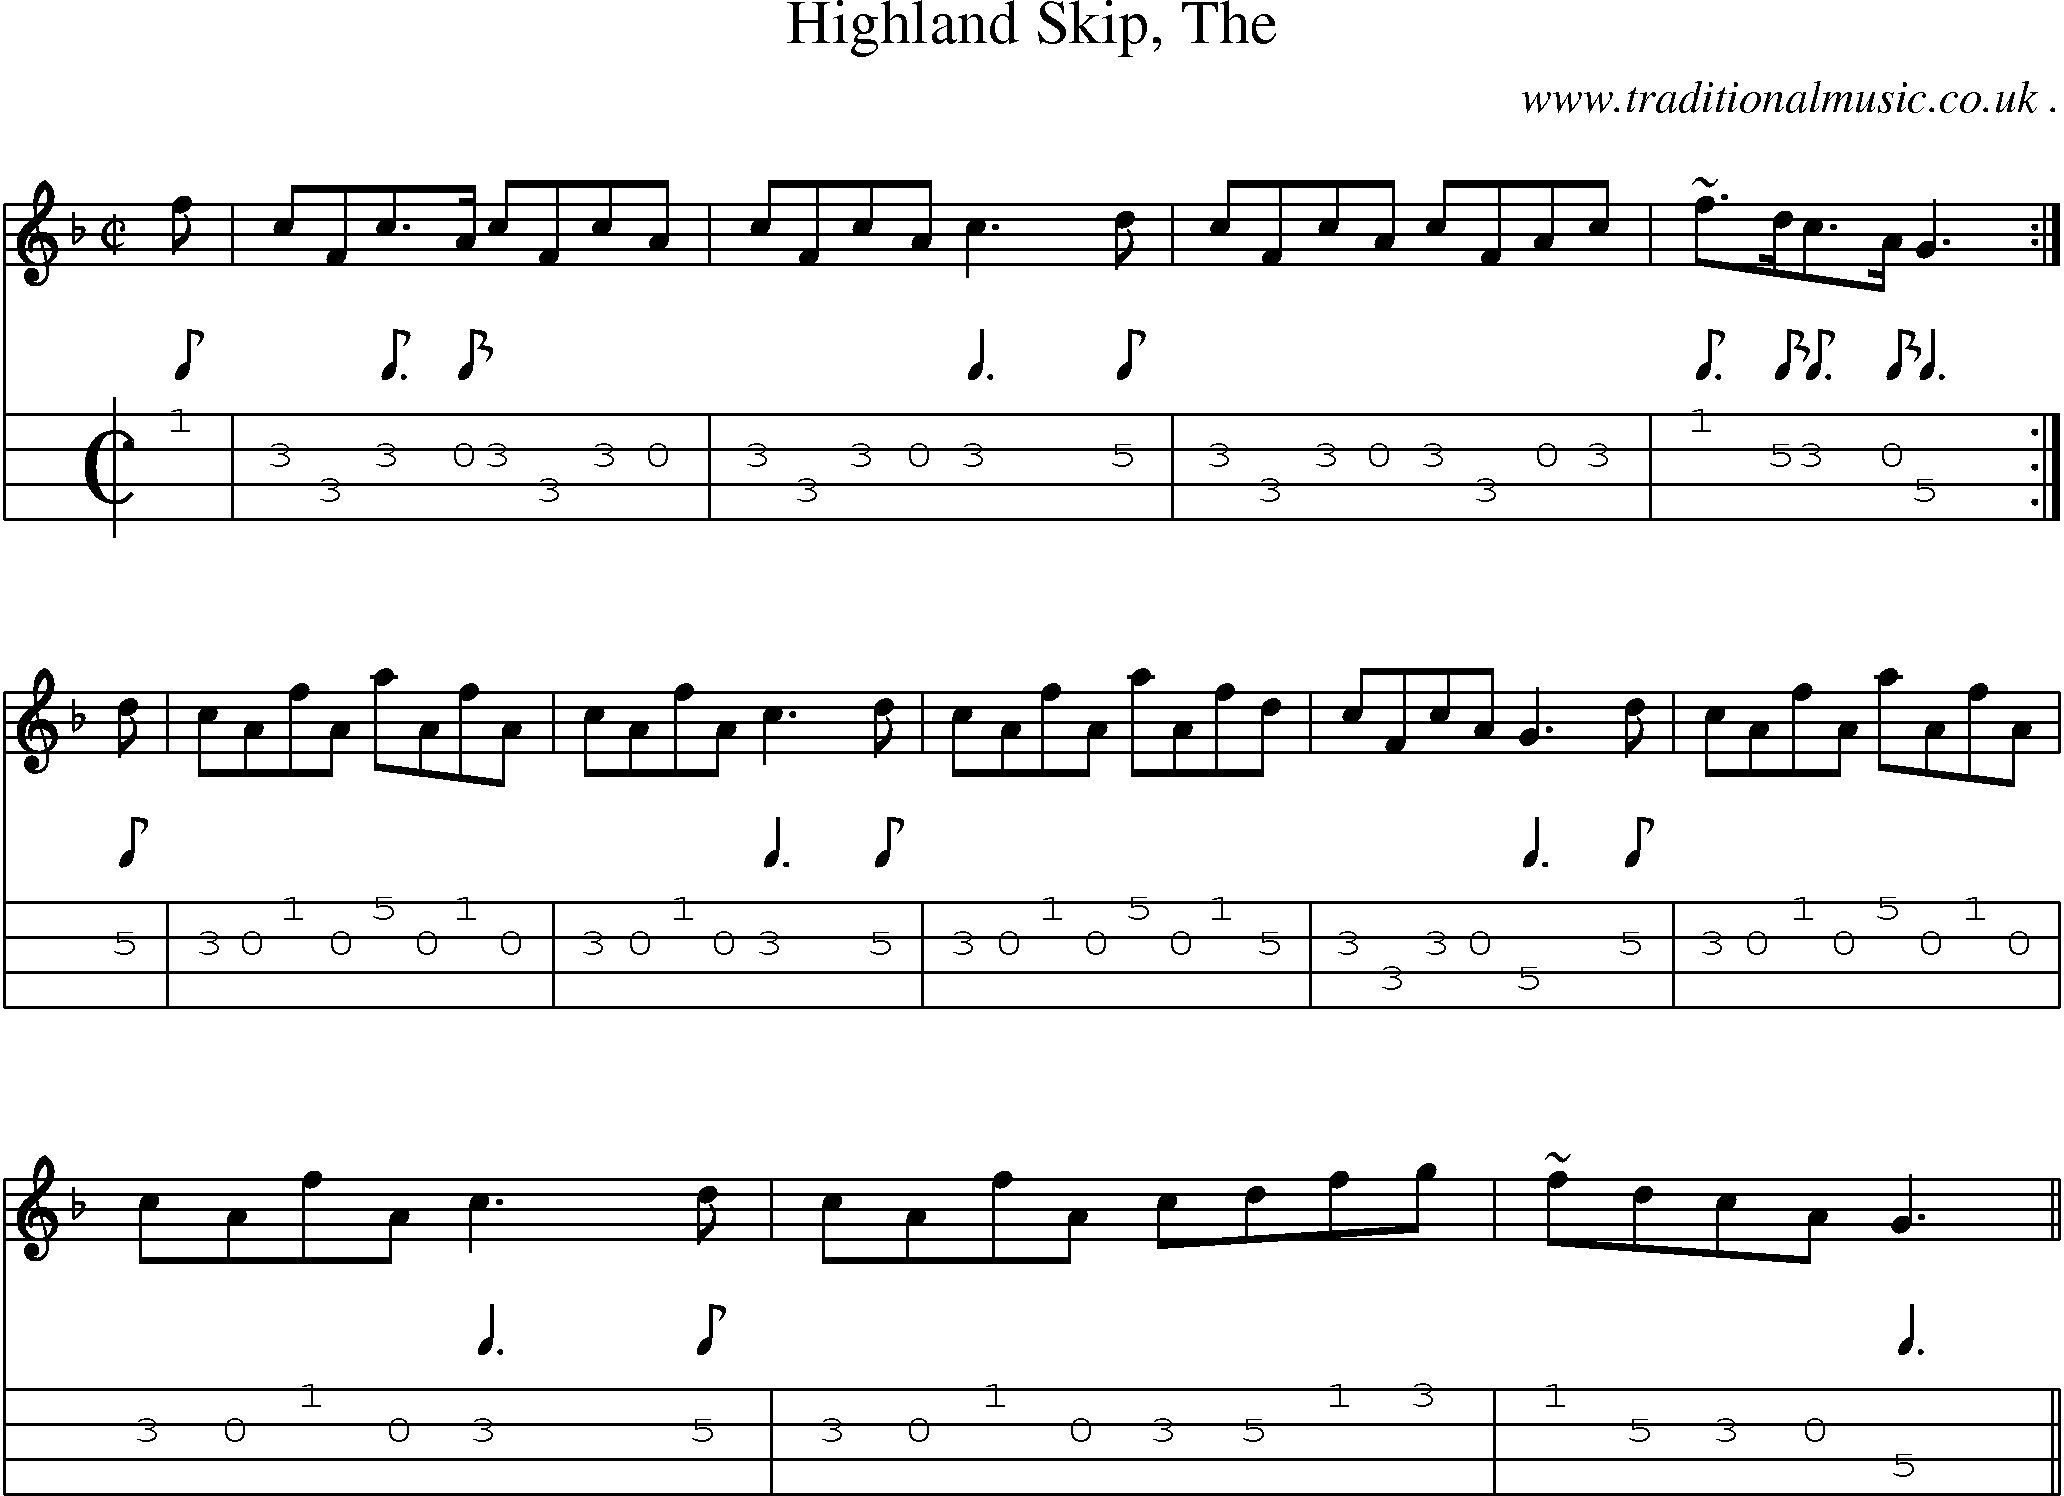 Sheet-music  score, Chords and Mandolin Tabs for Highland Skip The